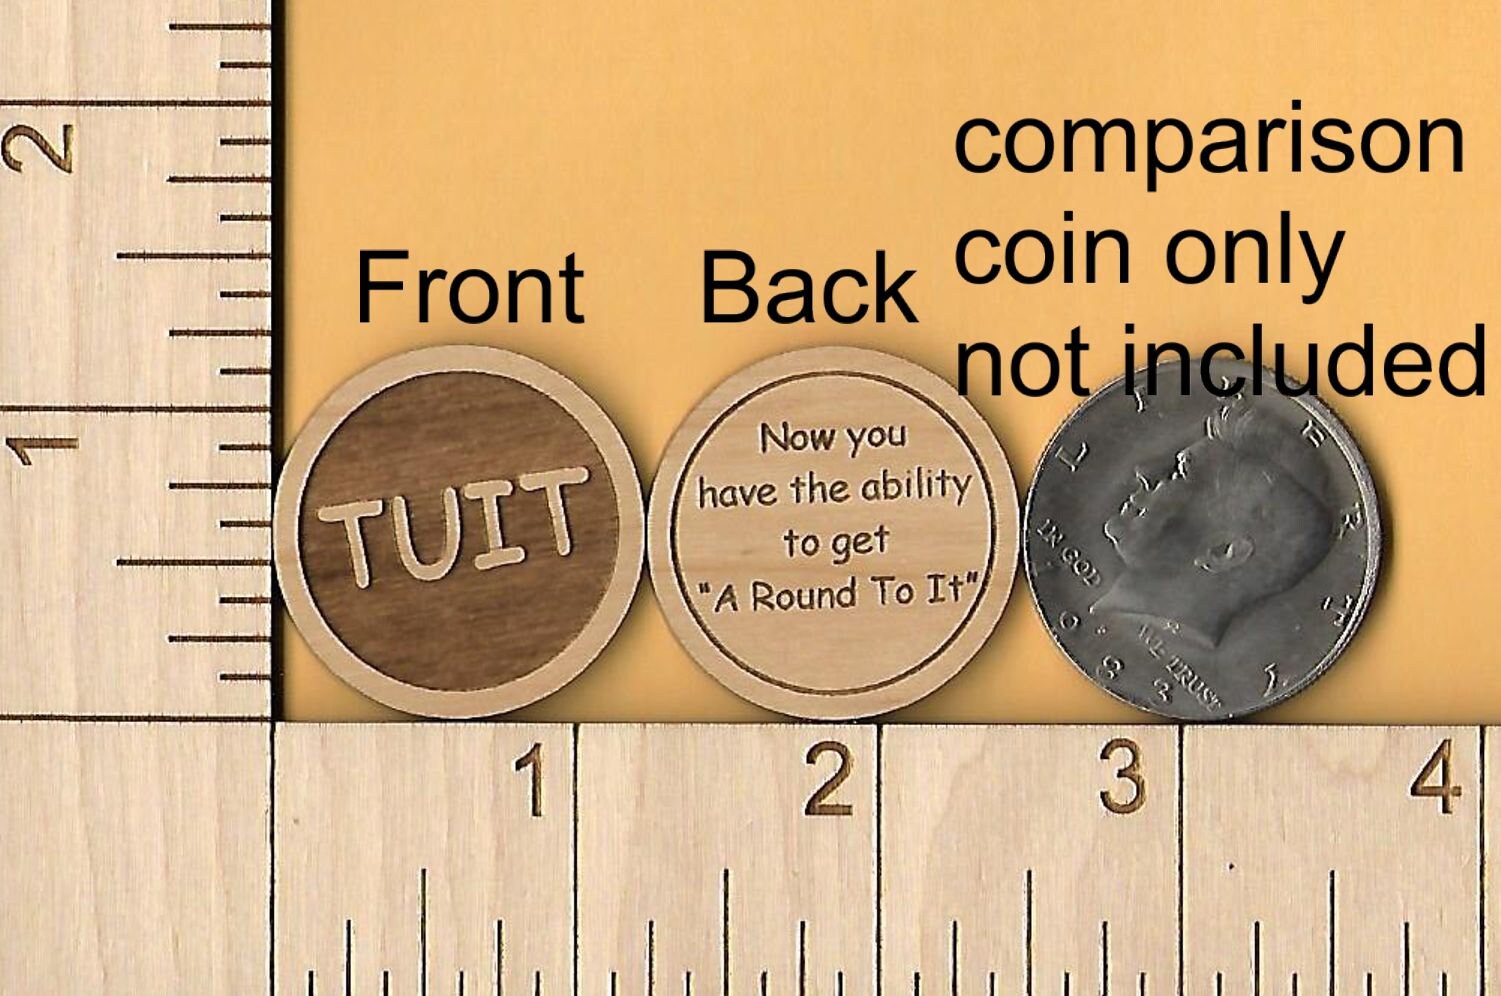 A round tuit coin